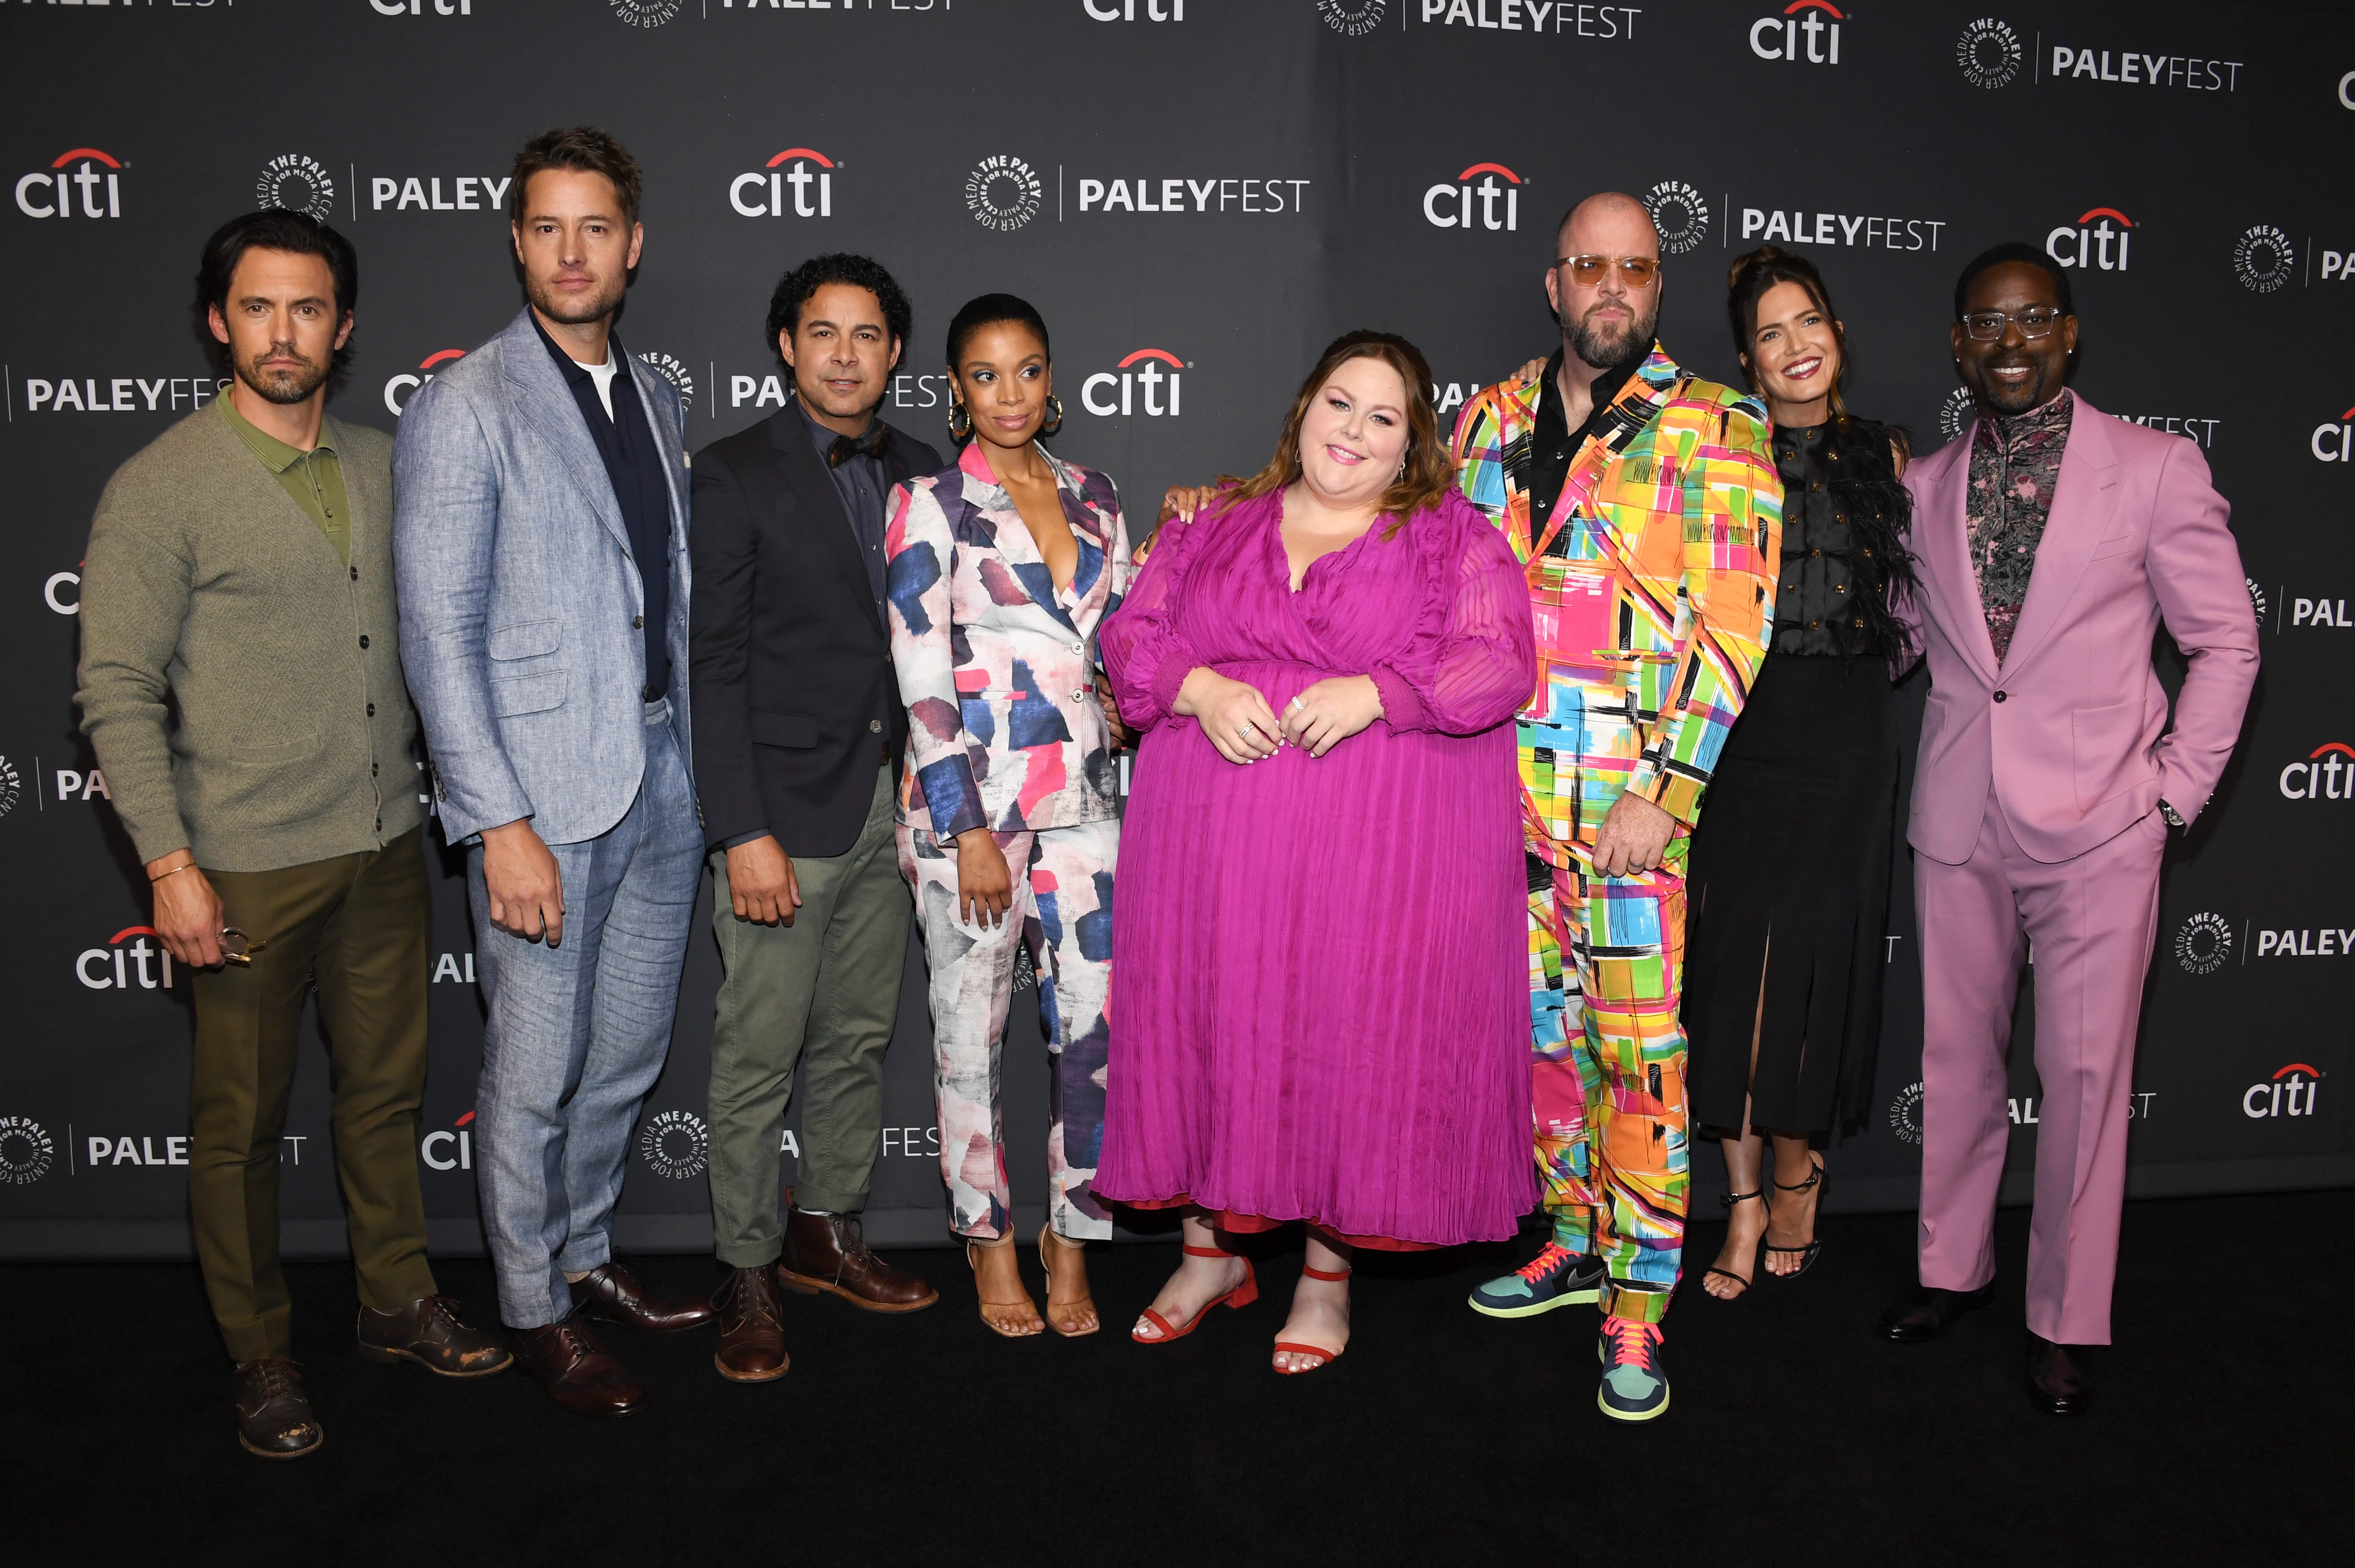 'This Is Us' finale: What's next for the cast?